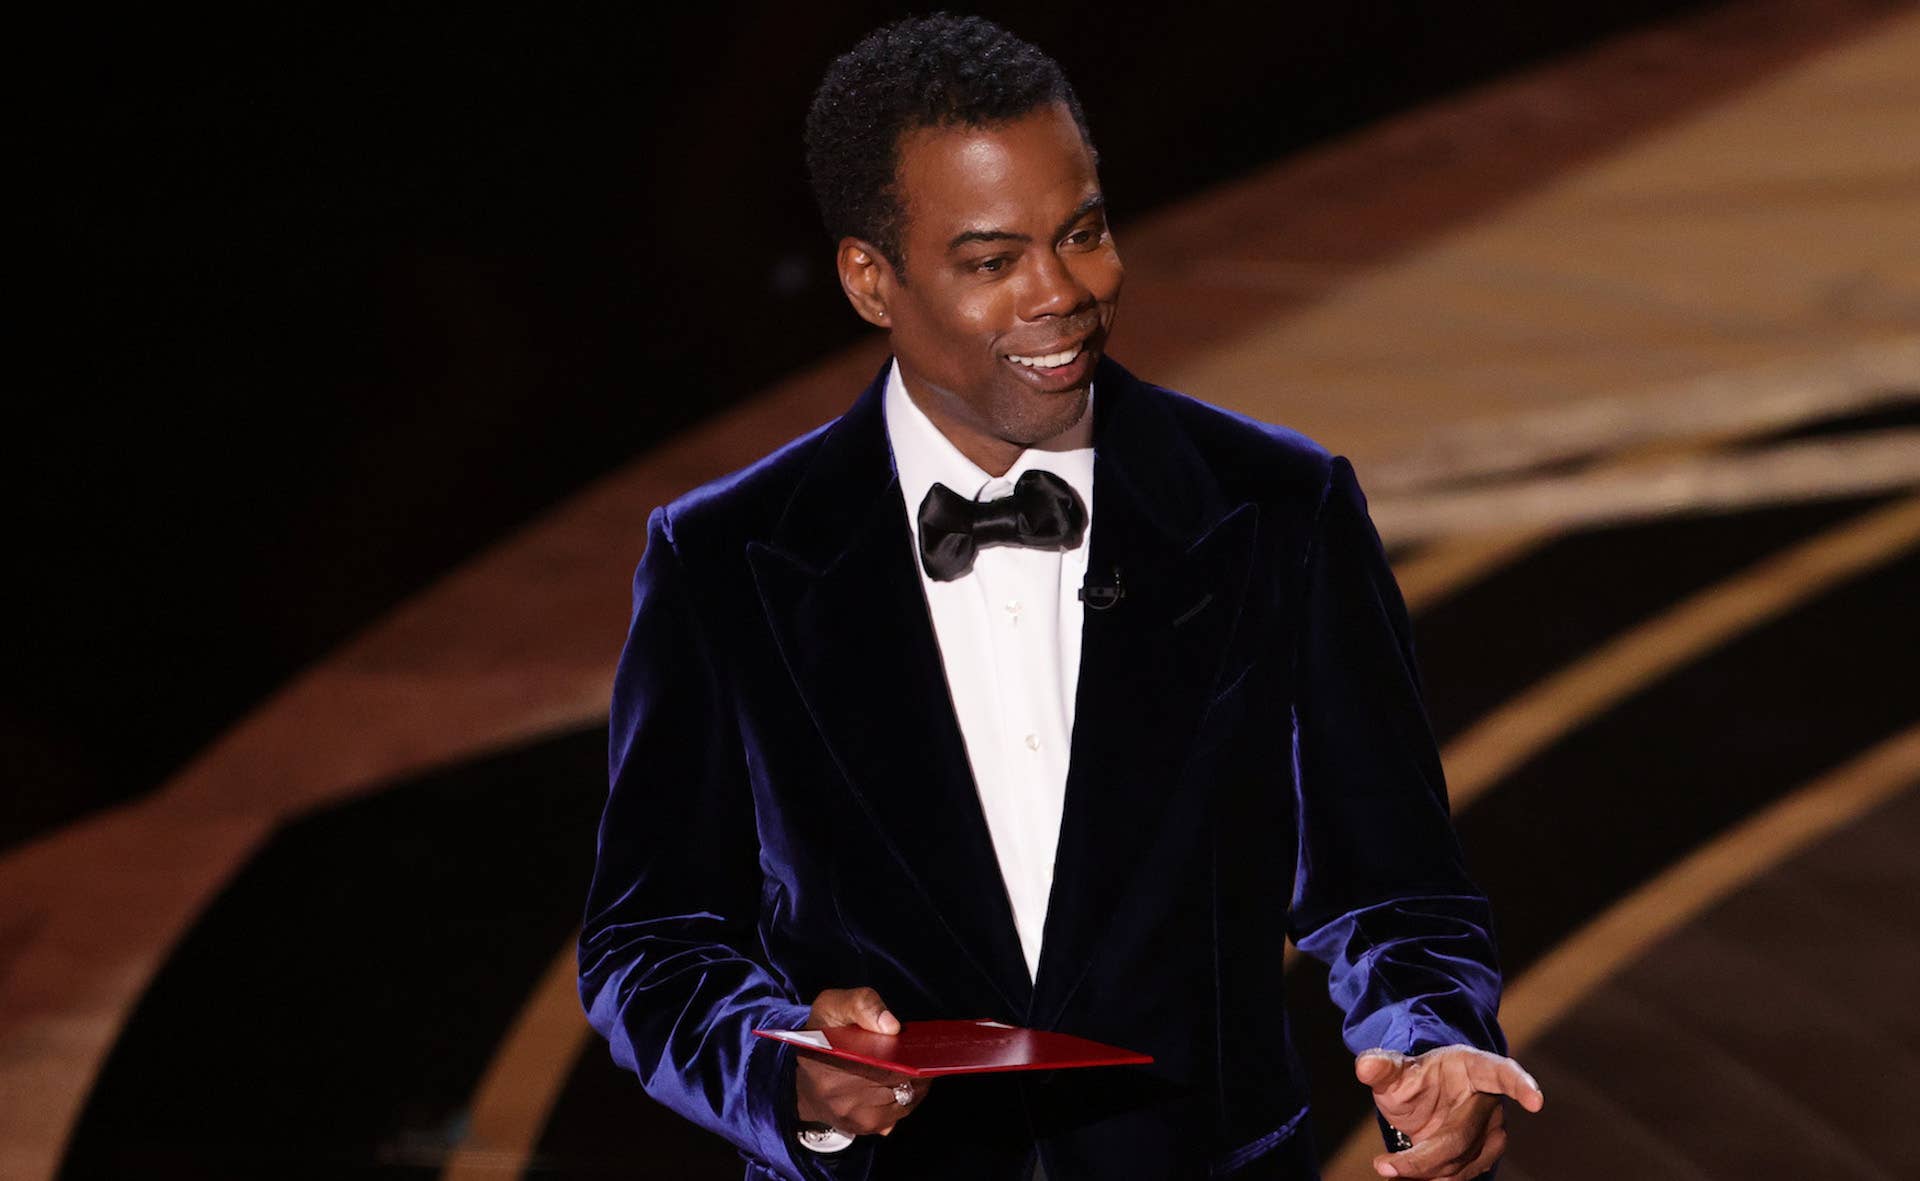 Chris Rock presents at the 94th Annual Academy Awards